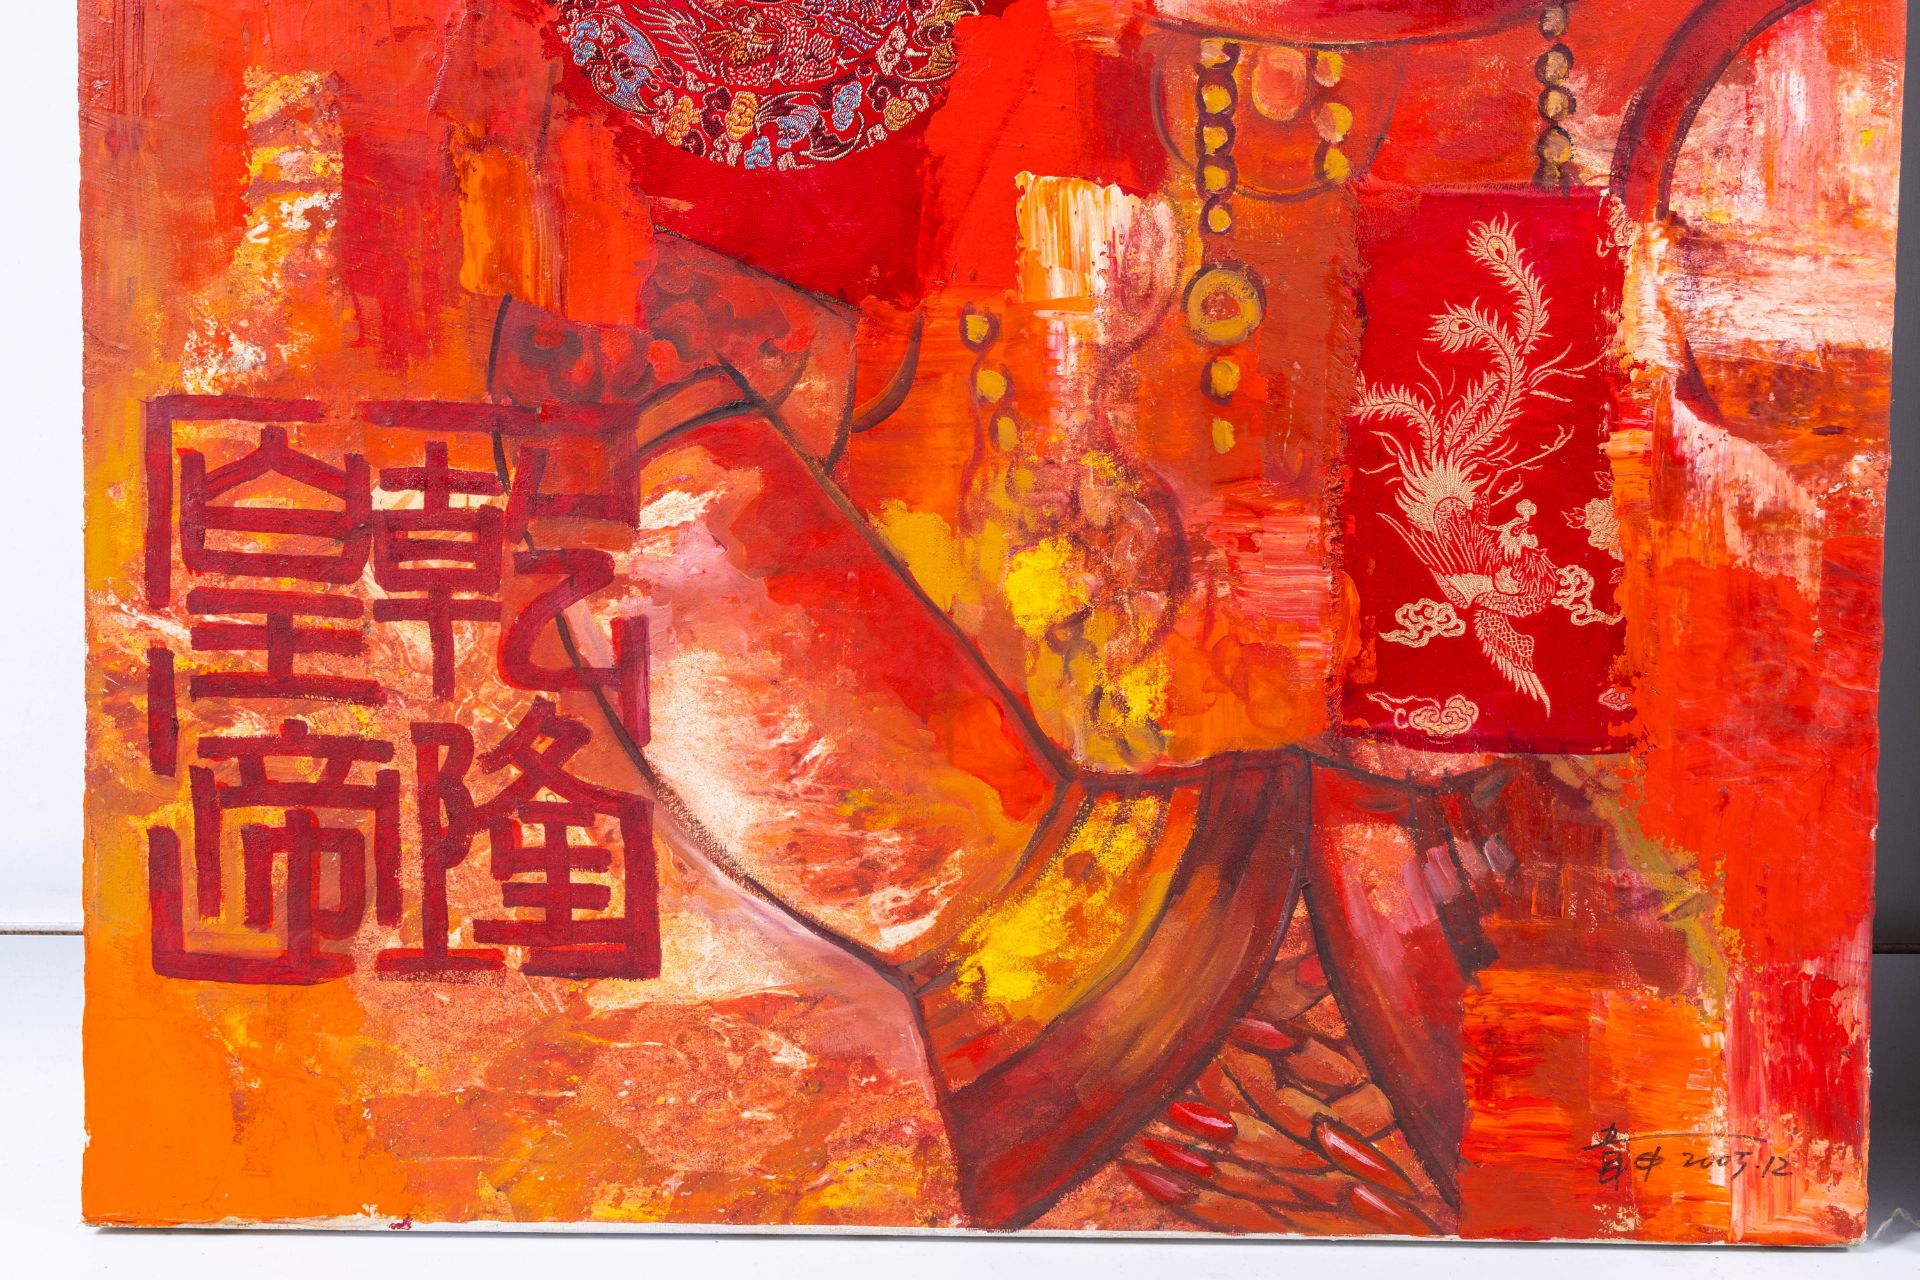 Wei Shen (1966): 'Emperor and Empress' and Dancing ladies, mixed media, dated 2005 - Image 6 of 10